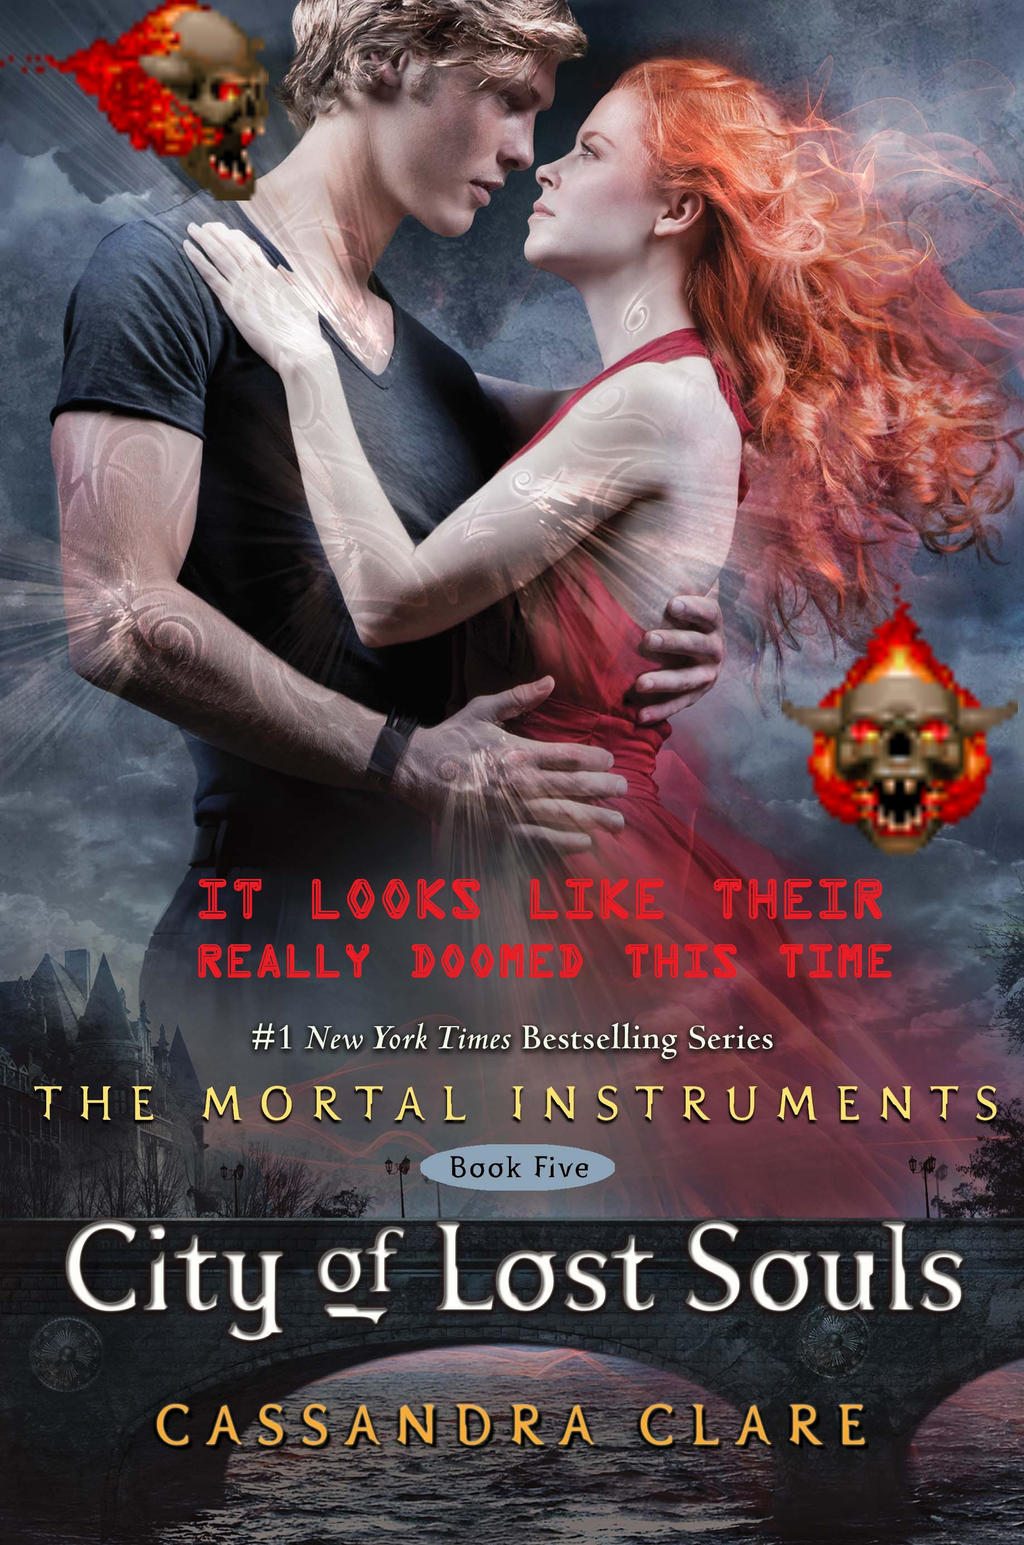 city_of_lost_souls_parody_by_laserdogbad